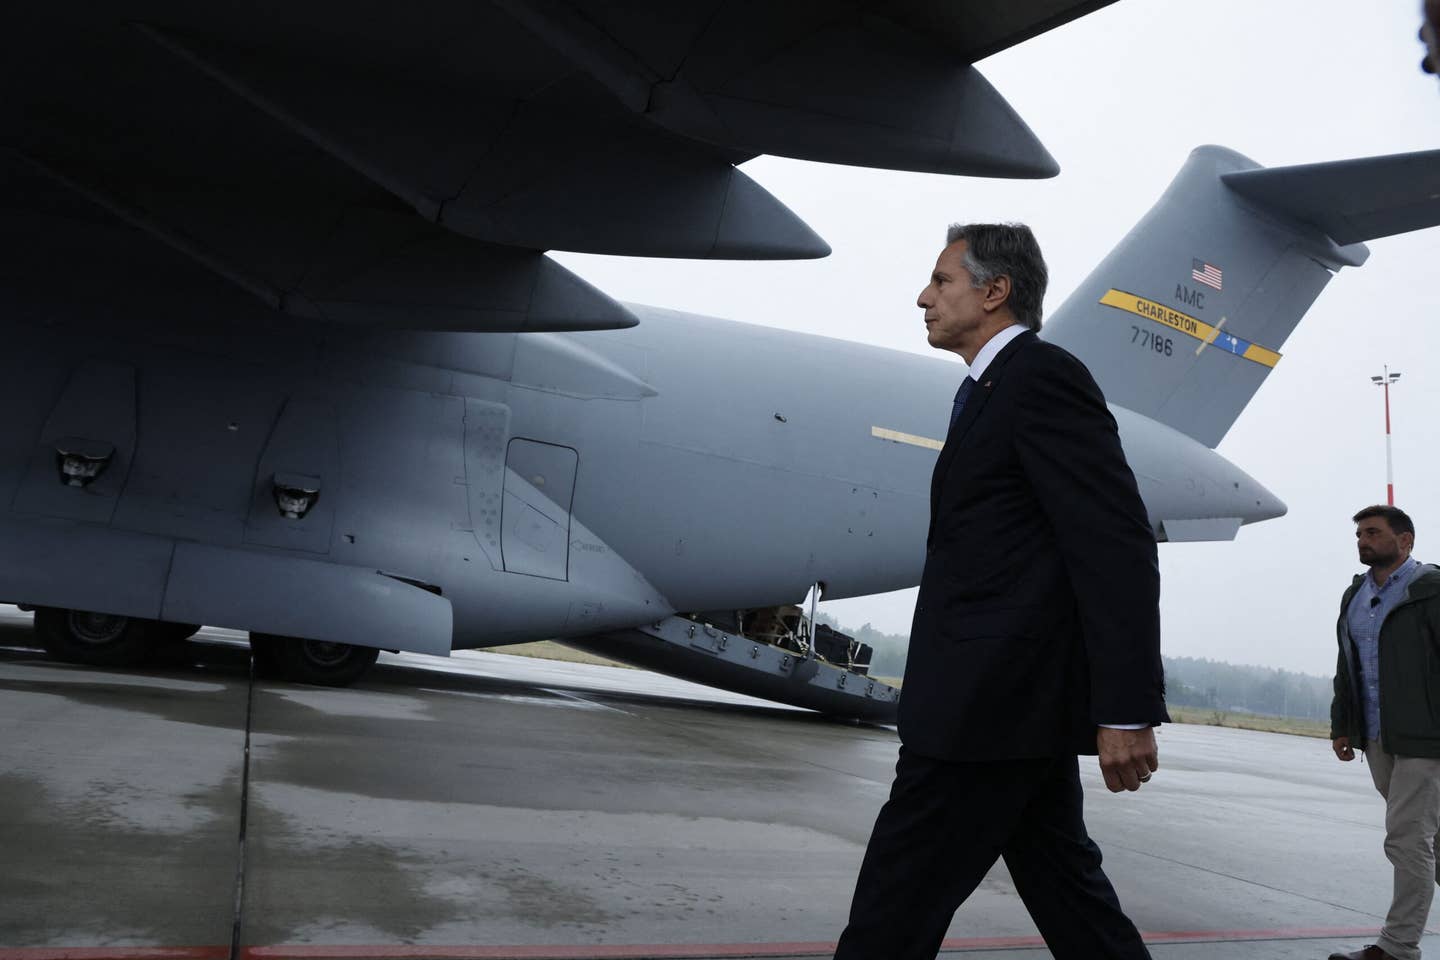 U.S. Secretary of State Antony Blinken arrives to board a plane to travel to Brussels ahead of a meeting with NATO counterparts on Sept. 9, 2022. <em>JONATHAN ERNST AFP via Getty Images</em>